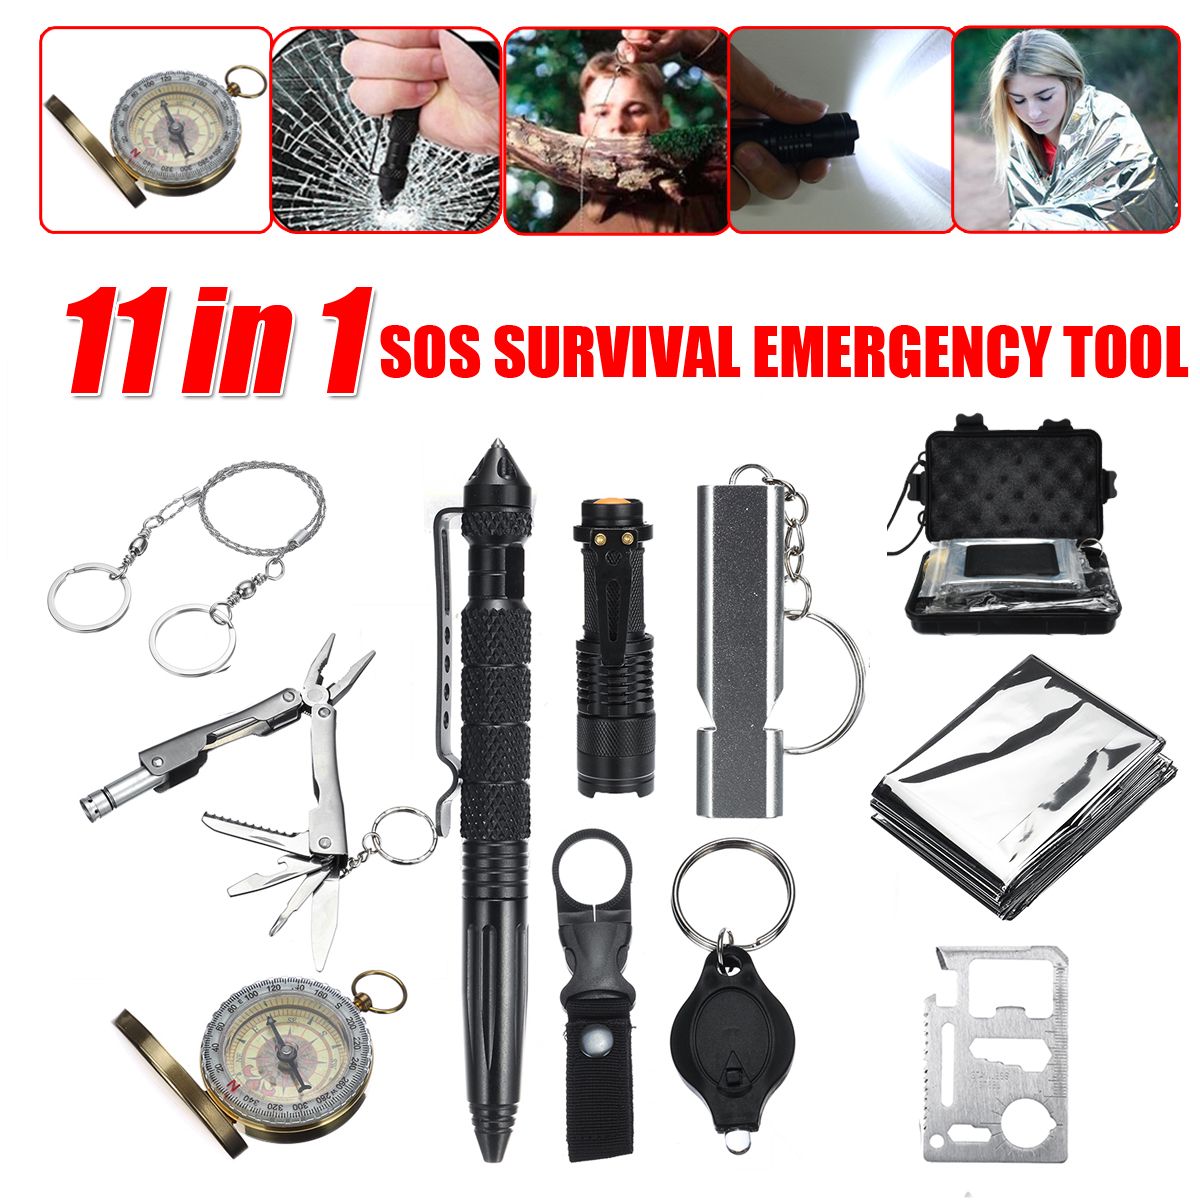 11-In-1-SOS-Emergency-Survival-Kit-EDC-Tools-Compass-Fret-Saw-Flashlight-Tactical-Camping-Hiking-1412048